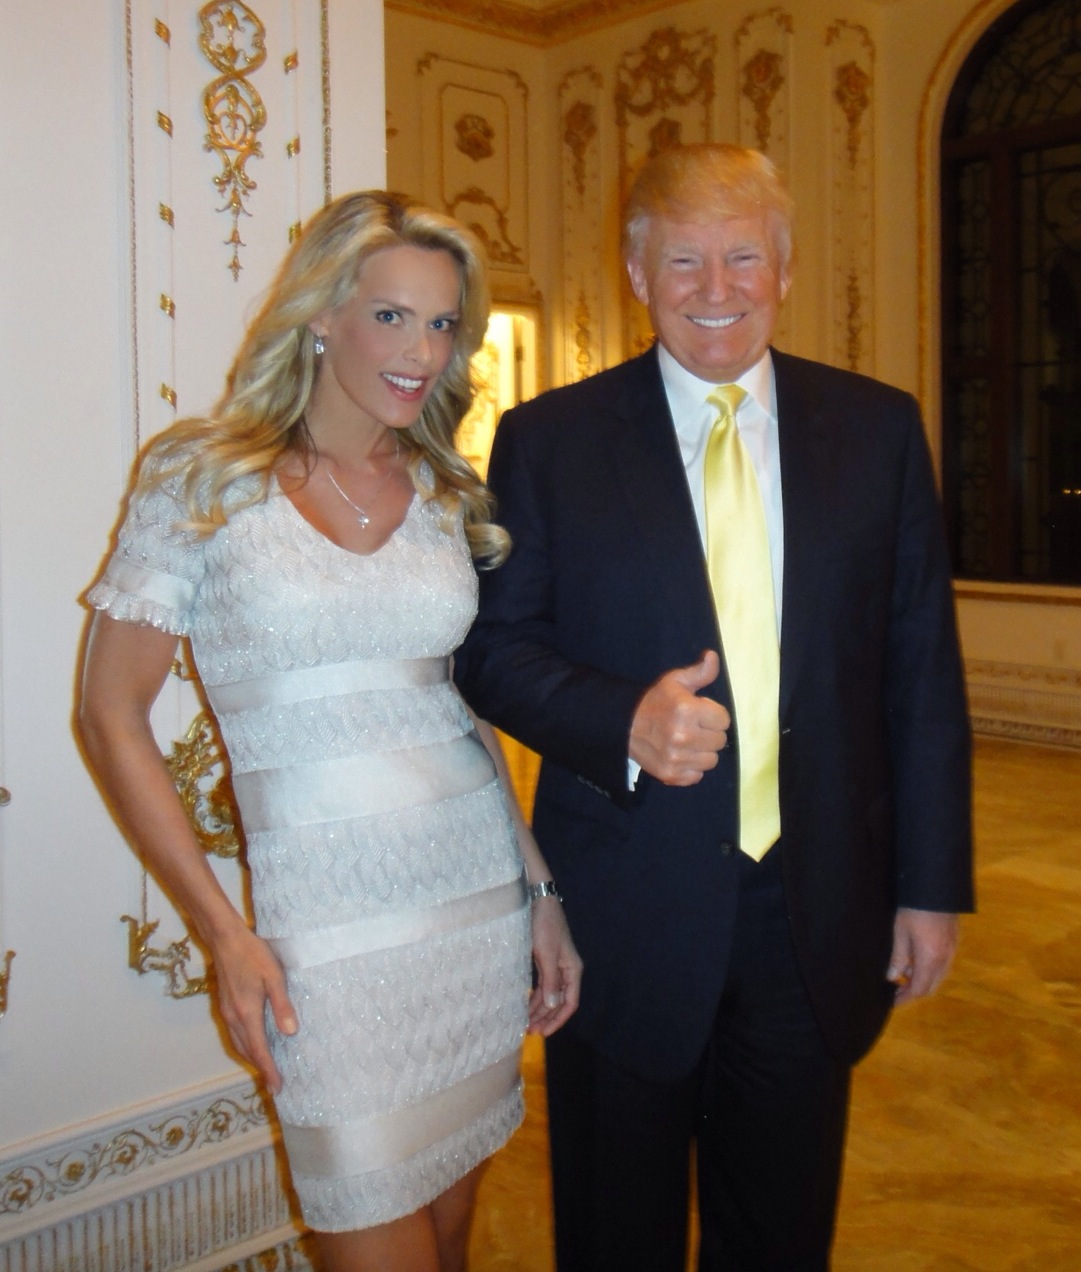 Heidi Albertsen poses with Donald Trump at the Mar-a-Lago in Palm Beach, Florida in January, 2014.